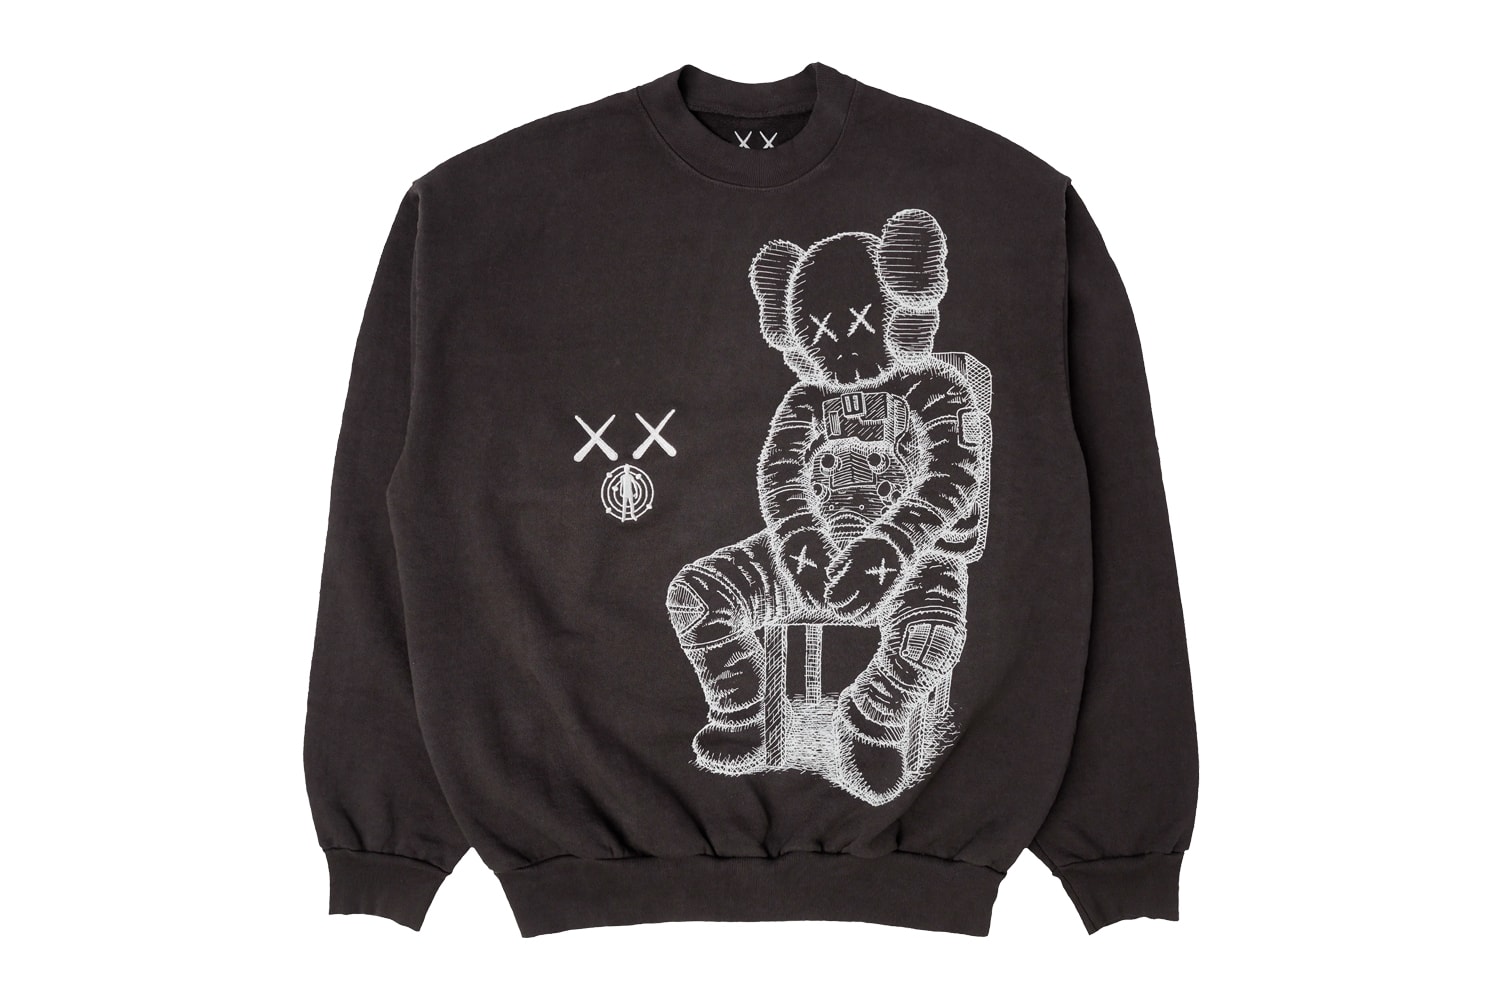 KAWS Kid Cudi Man on the Moon Trilogy Box Set Merch Release Info Buy Price Man on the Moon II: The Legend of Mr. Rager The End of Day The Chosen